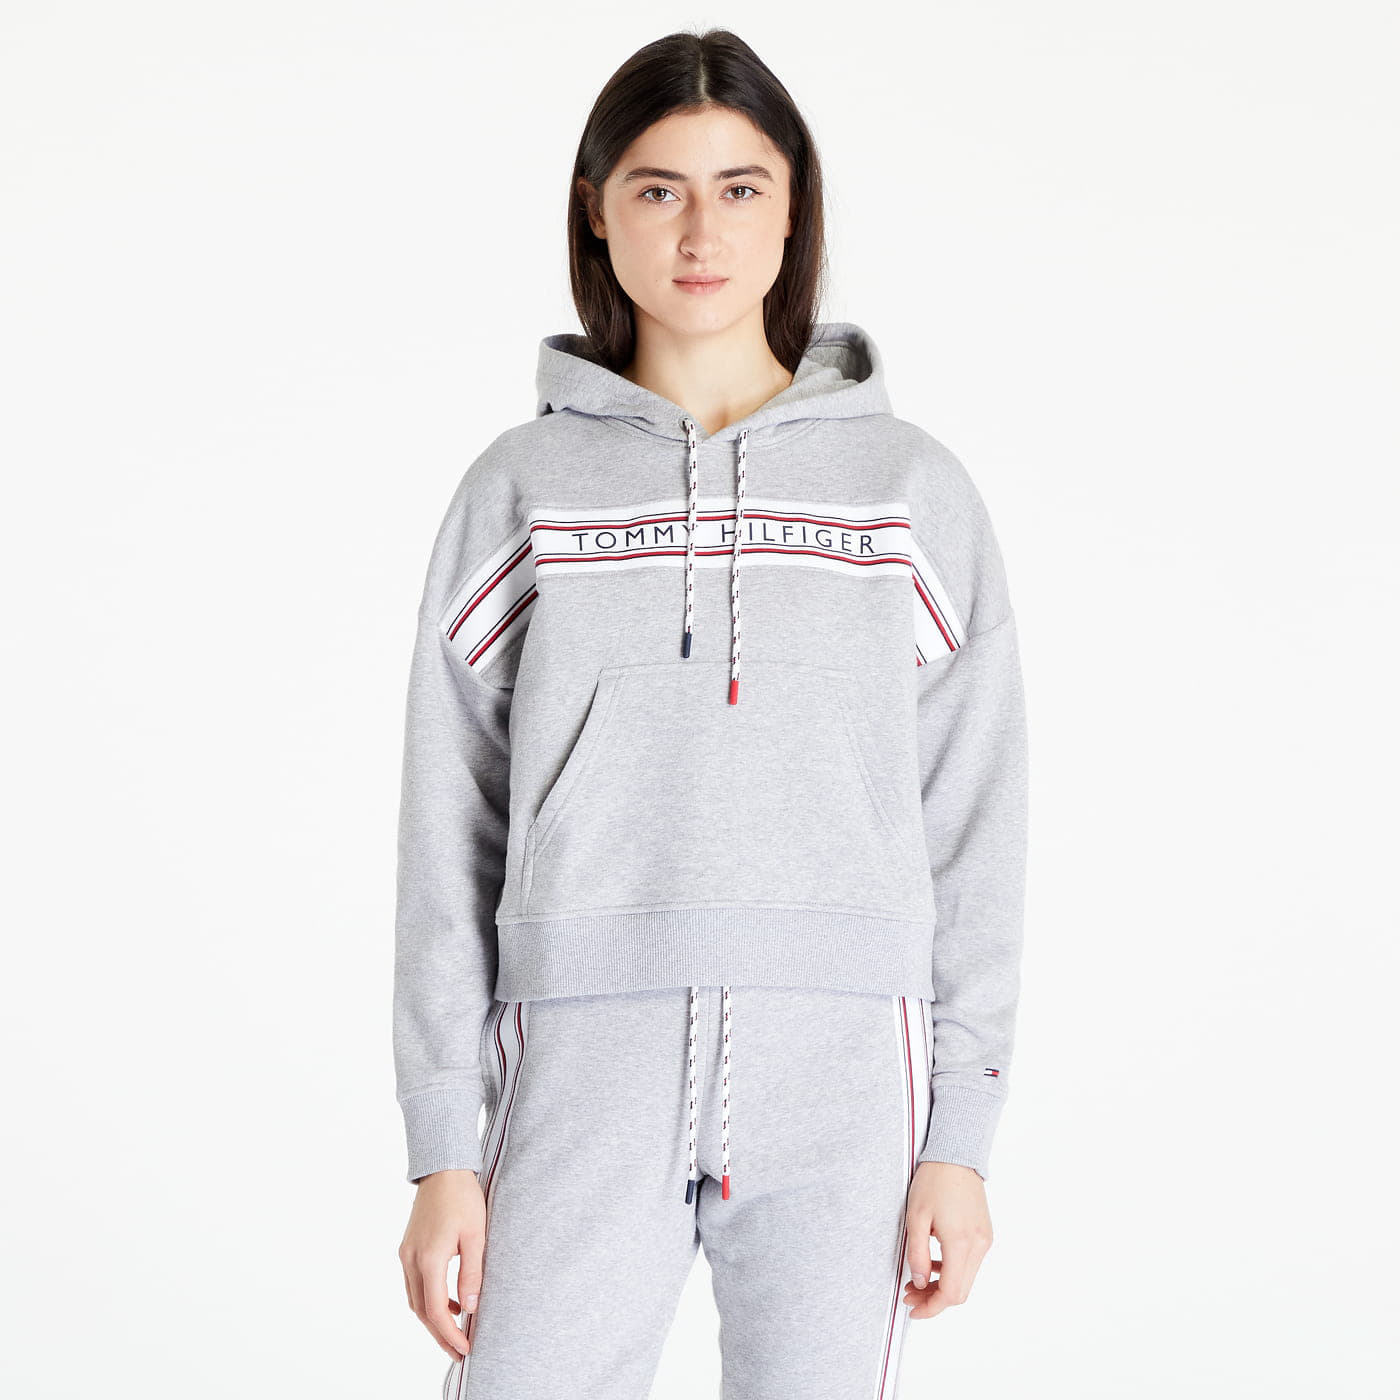 Dukserice Tommy Hilfiger Classic Hoodie Light Grey Heather